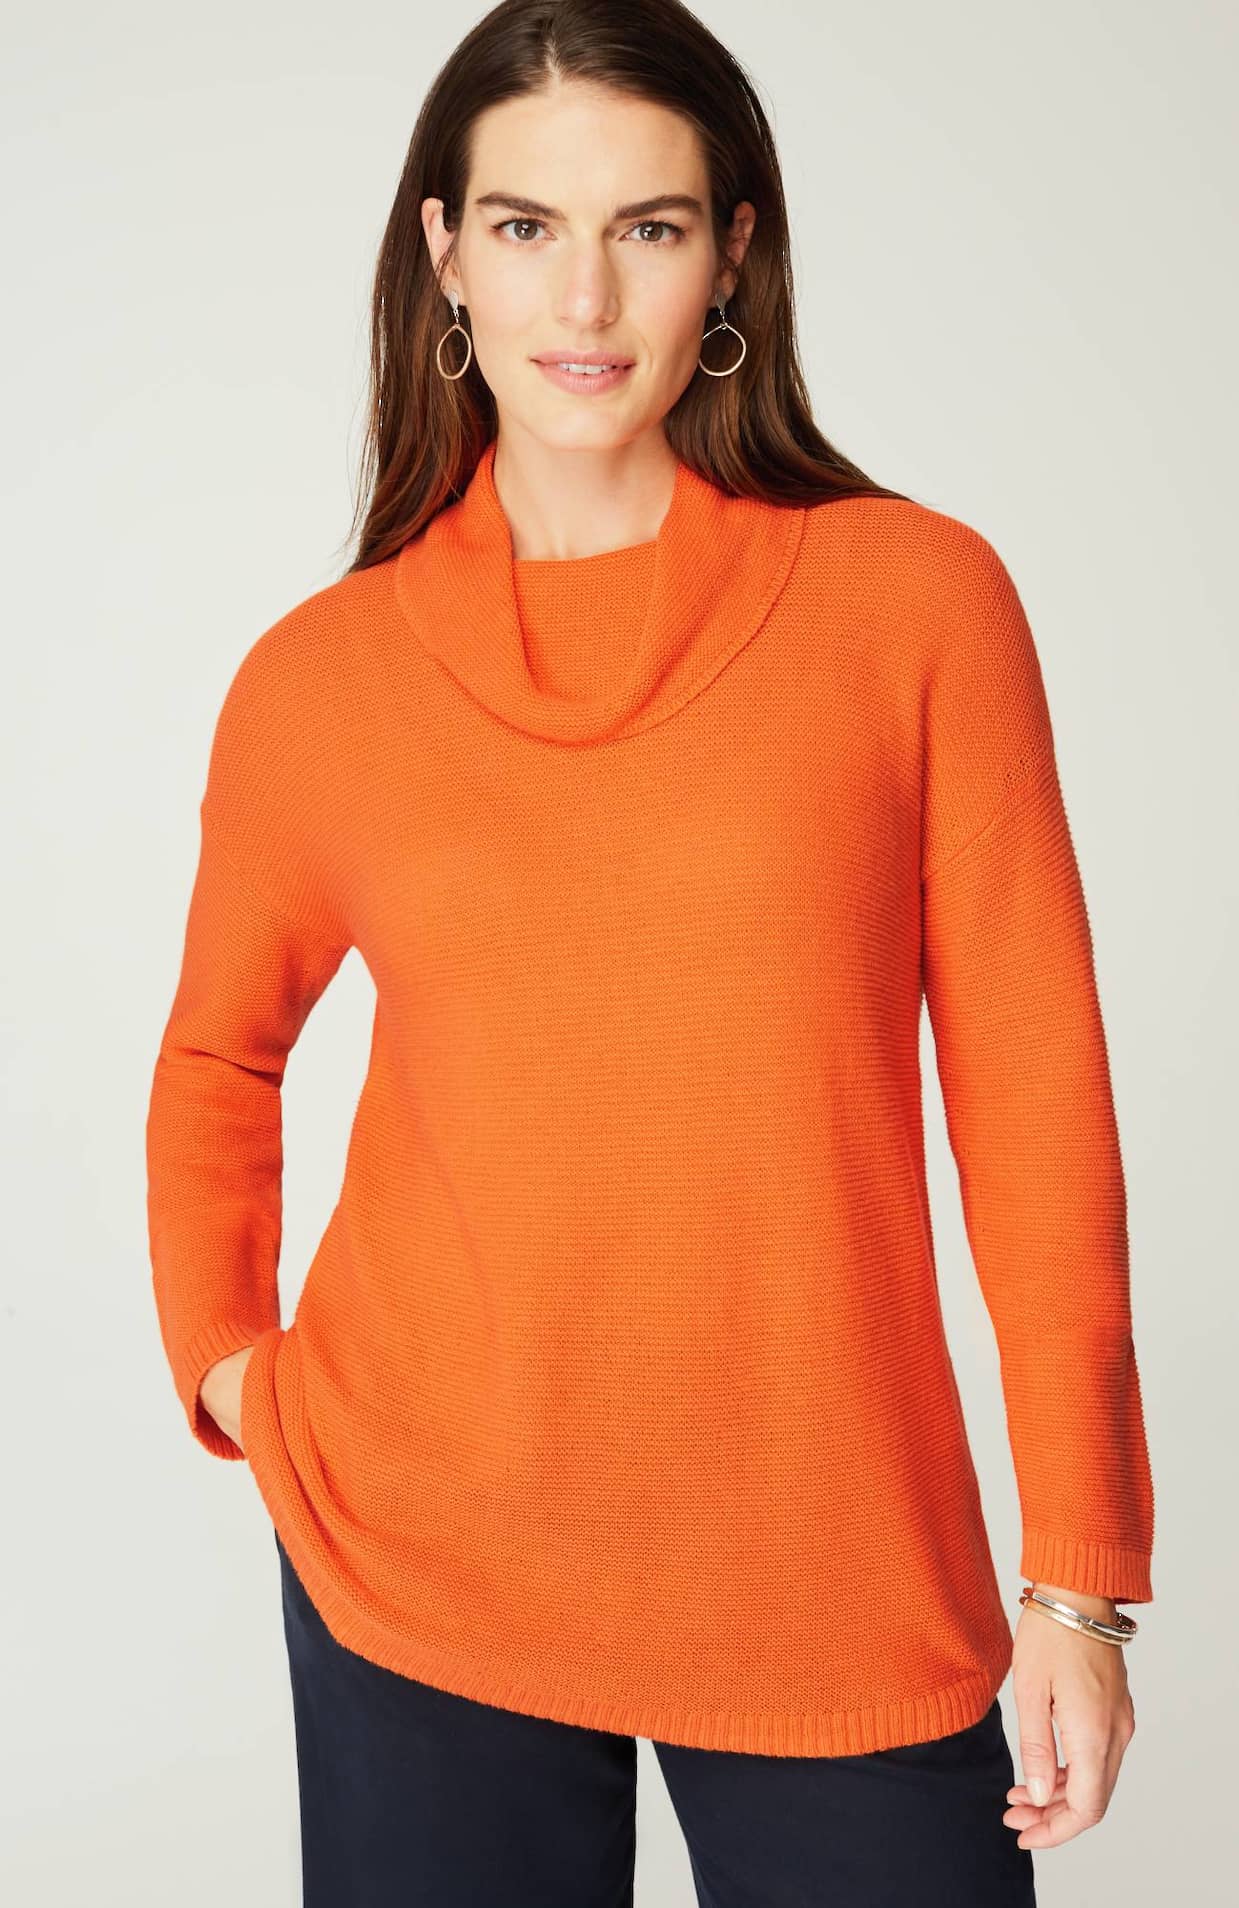 J.Jill Sweater Womens Large Petite Orange Cotton Cowl Neck Pullover Casual  Size undefined - $30 - From Angela